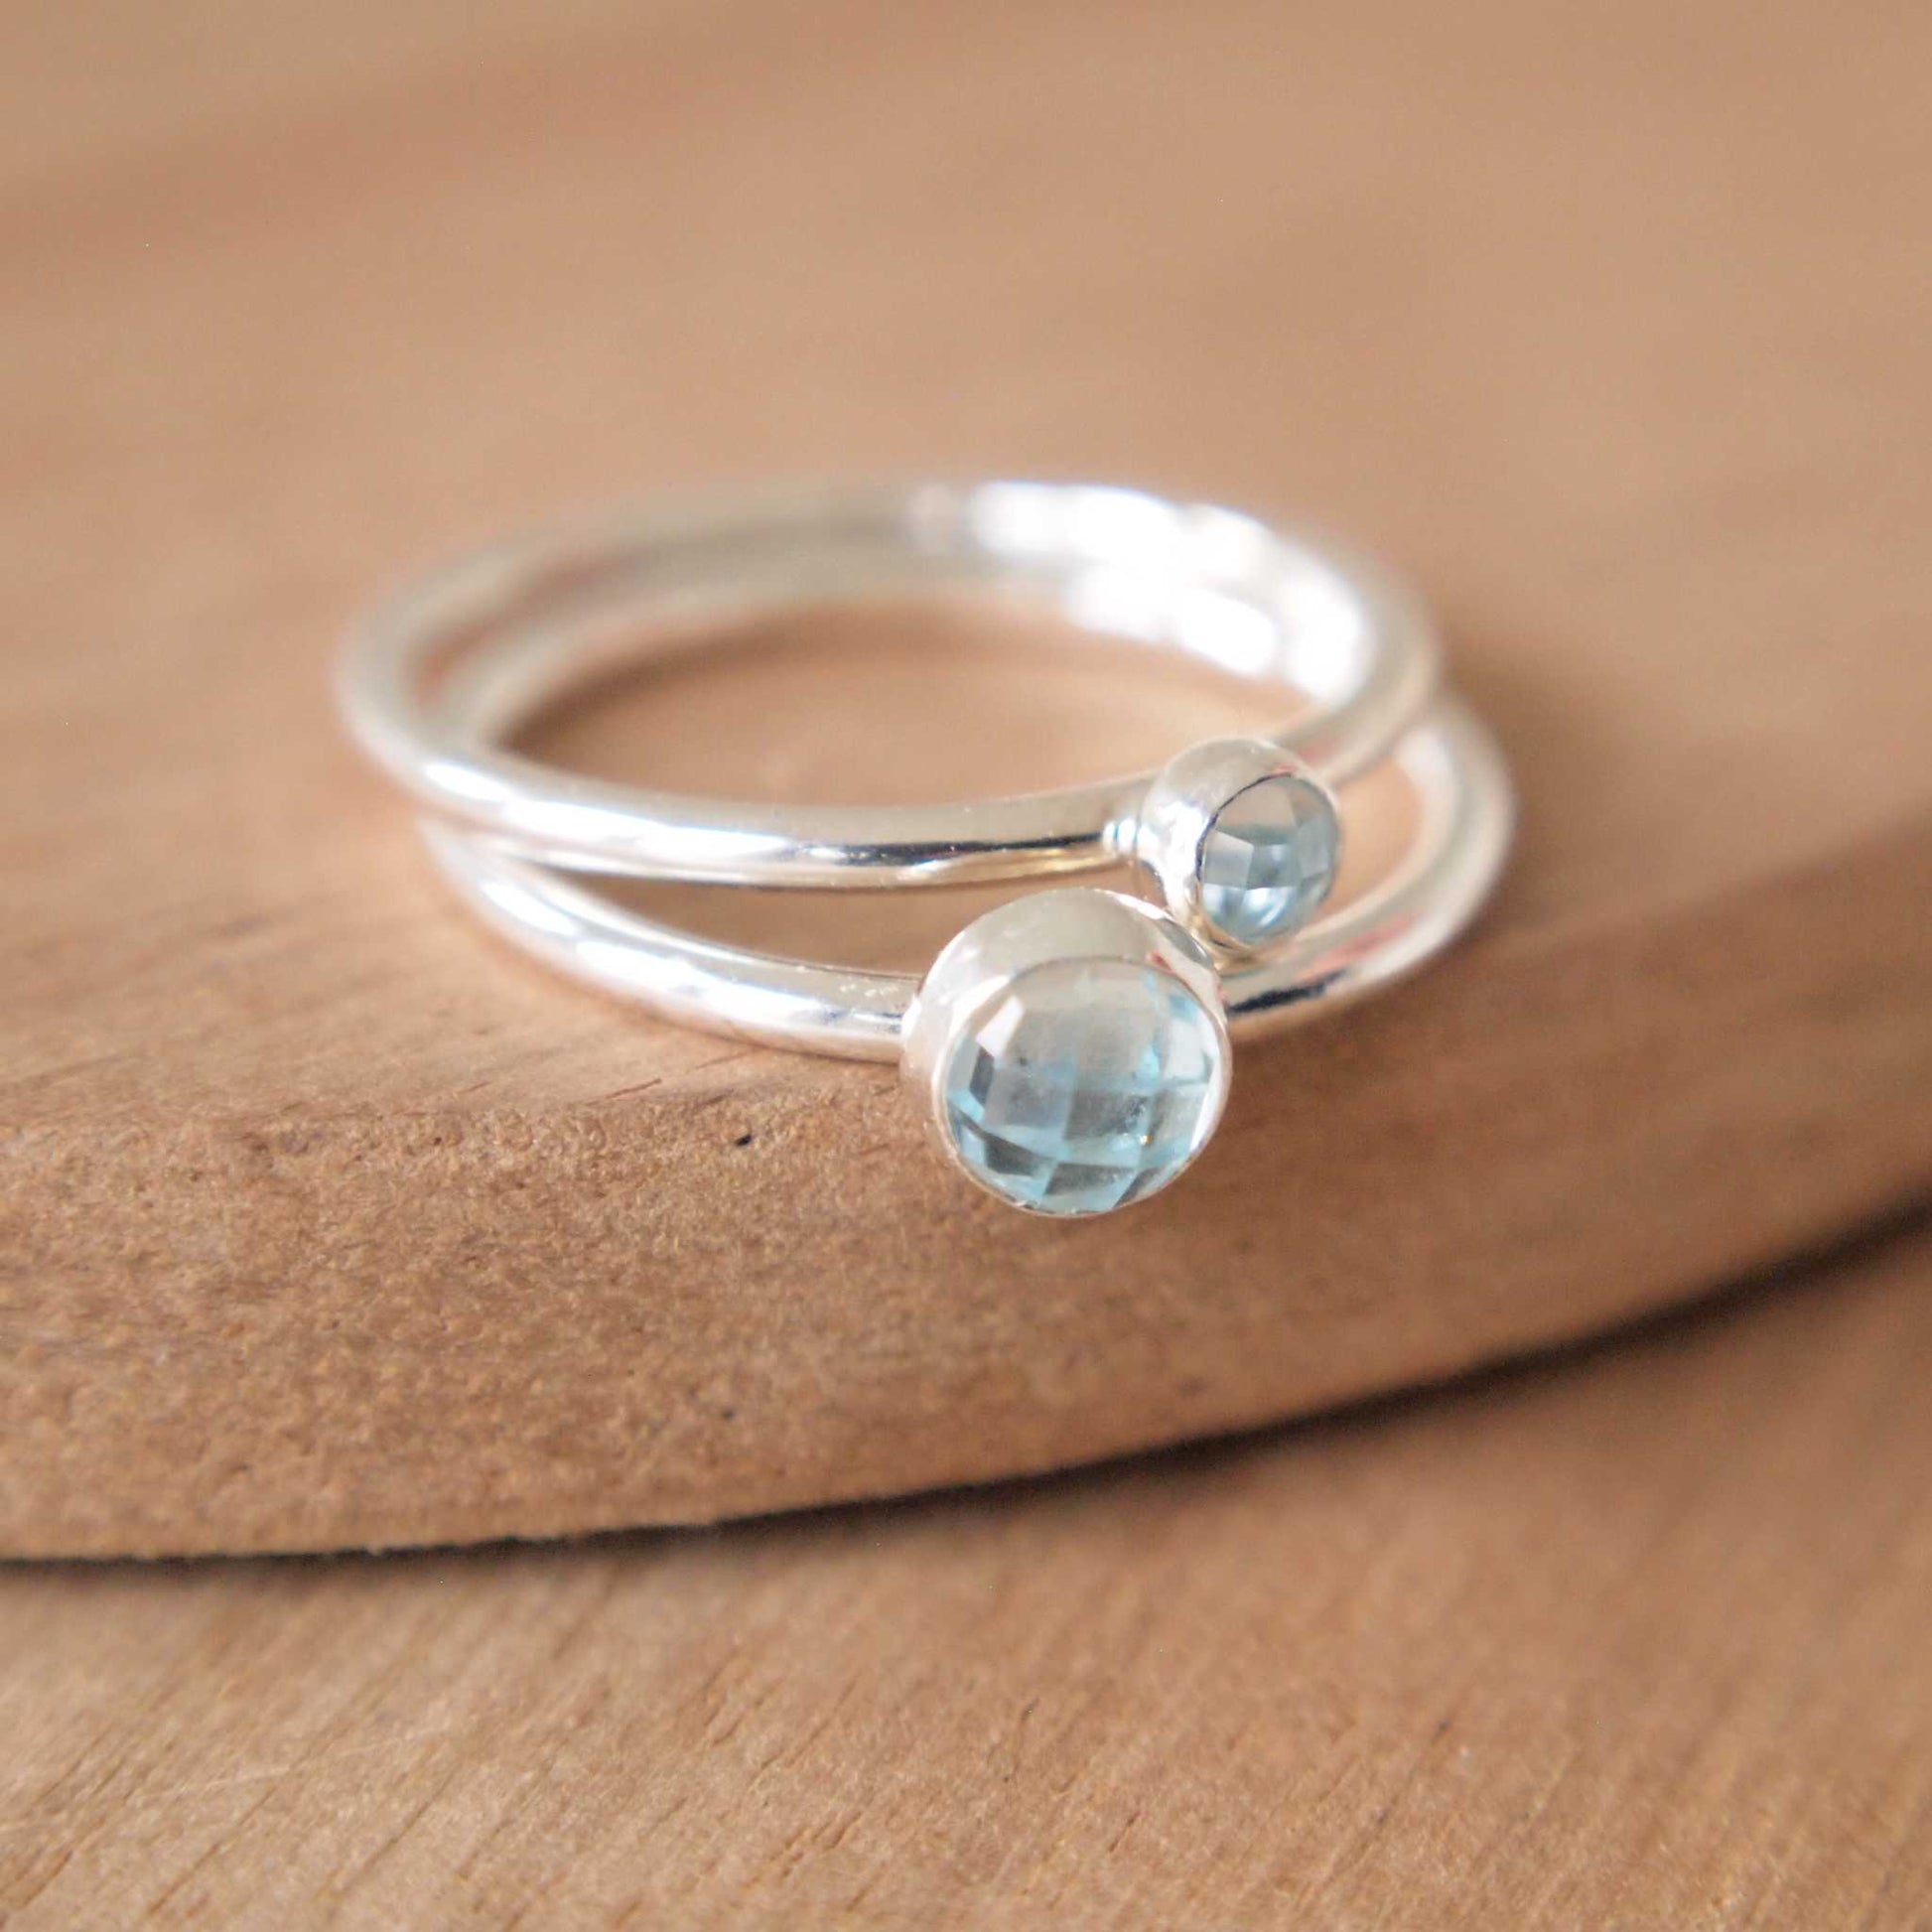 Two ring set in Sterling Silver and Blue Topaz. The rings have two round facet cut cabochons in 5mm and 3mm size in a pale blue colour, and are set very simply onto bands of Sterling Silver. Handmade in Scotland by Maram Jewellery